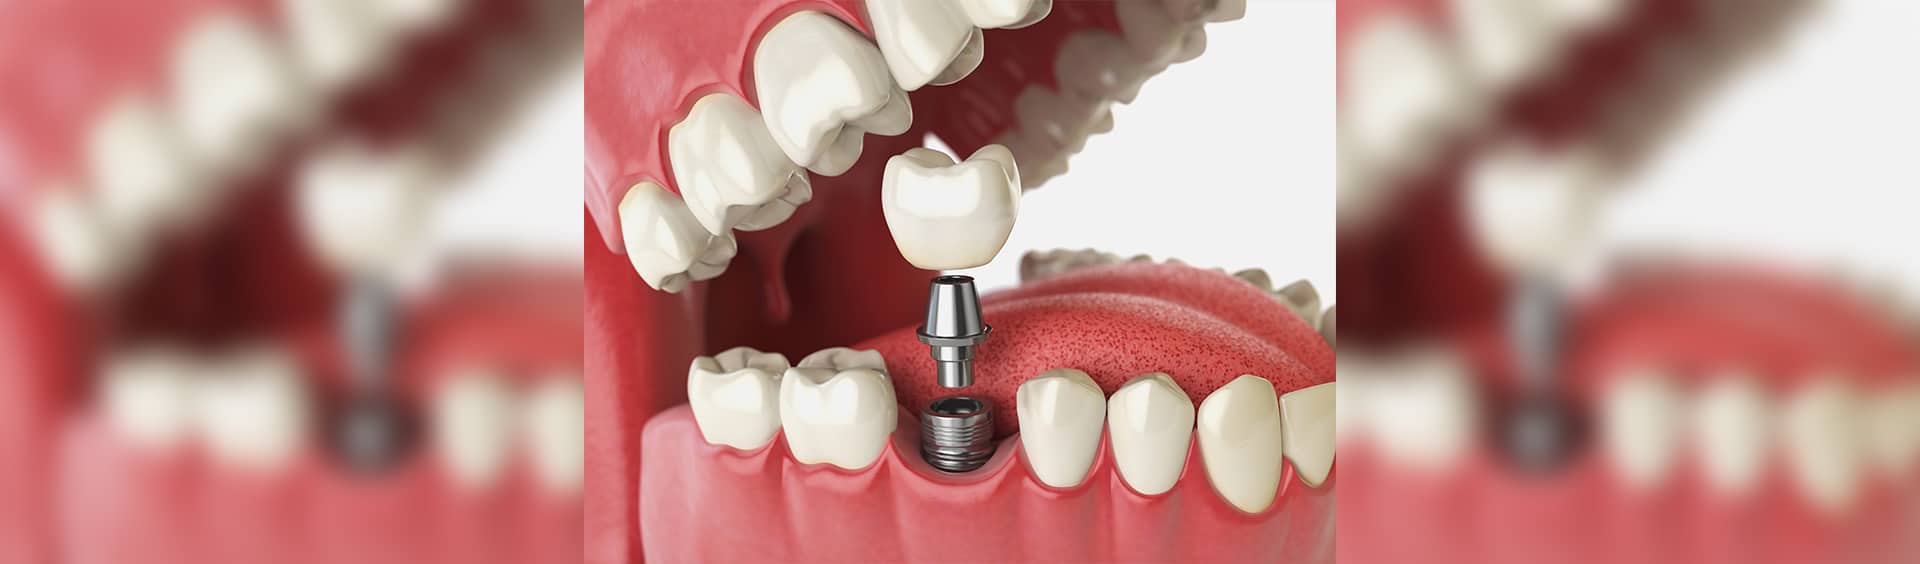 A-Dental Center - Benefits of Dental Implants Over Other Tooth Replacement Options